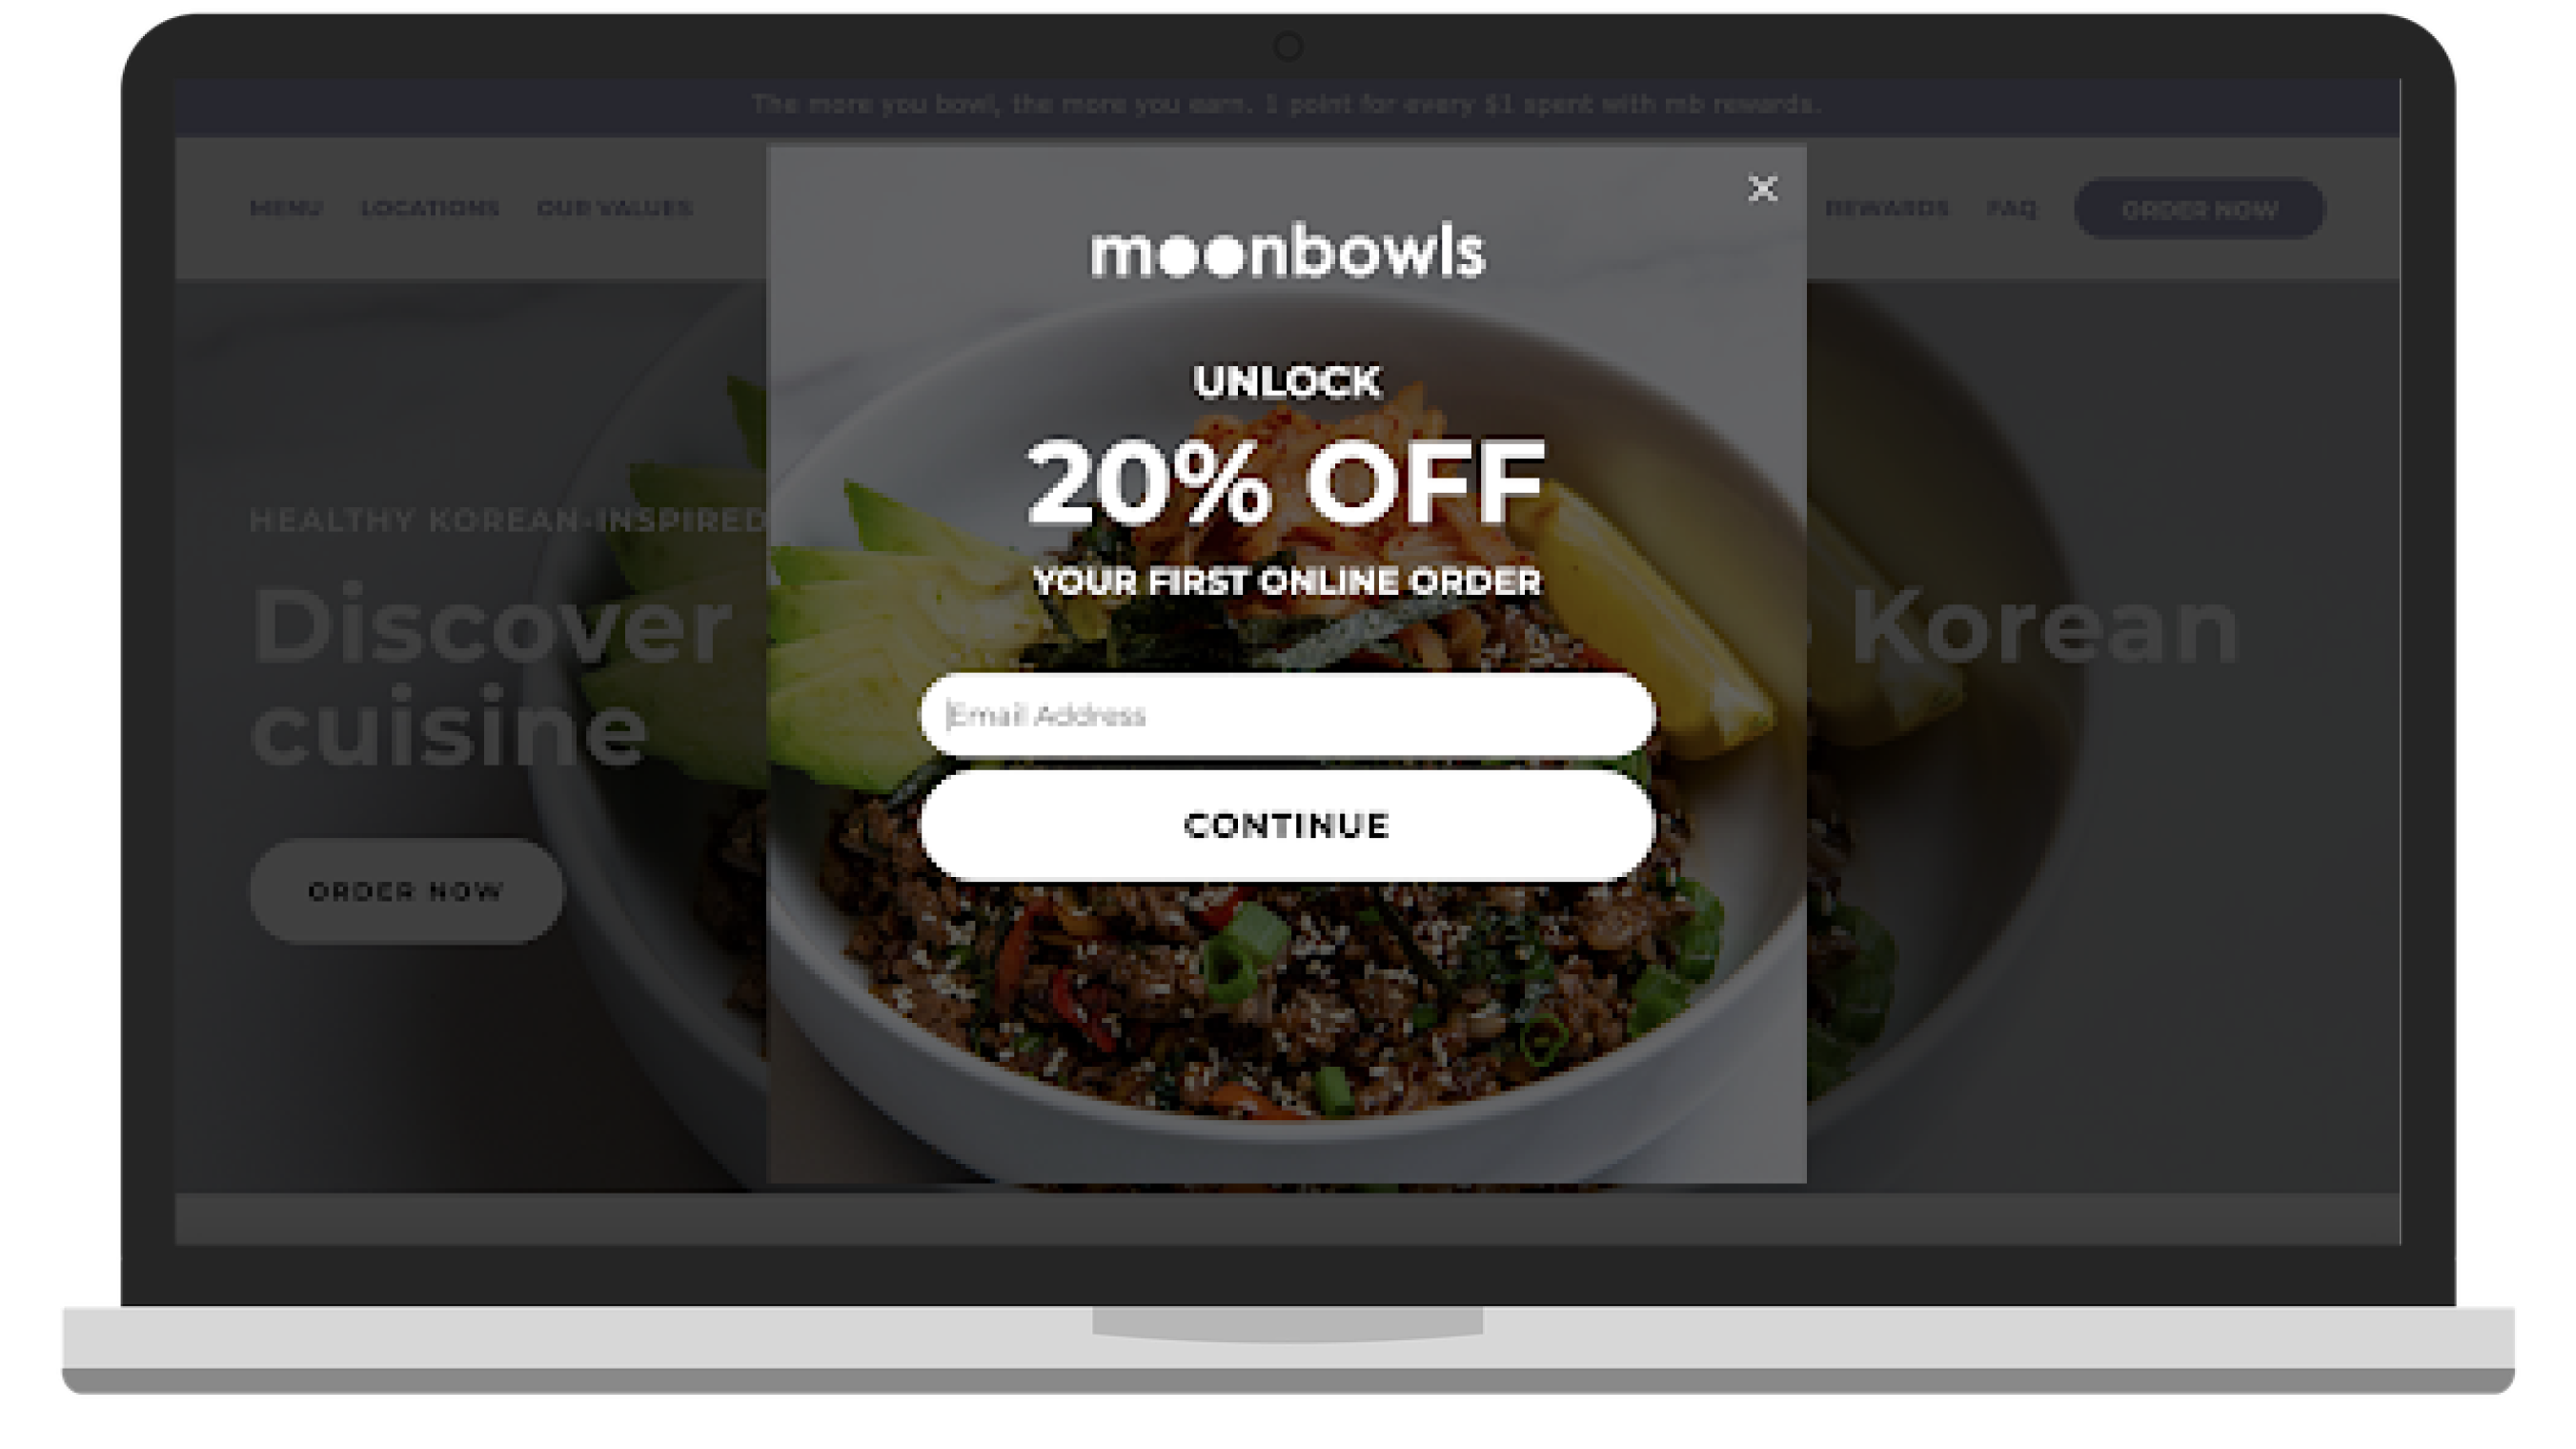 Moonbowls example of online ordering incentives.